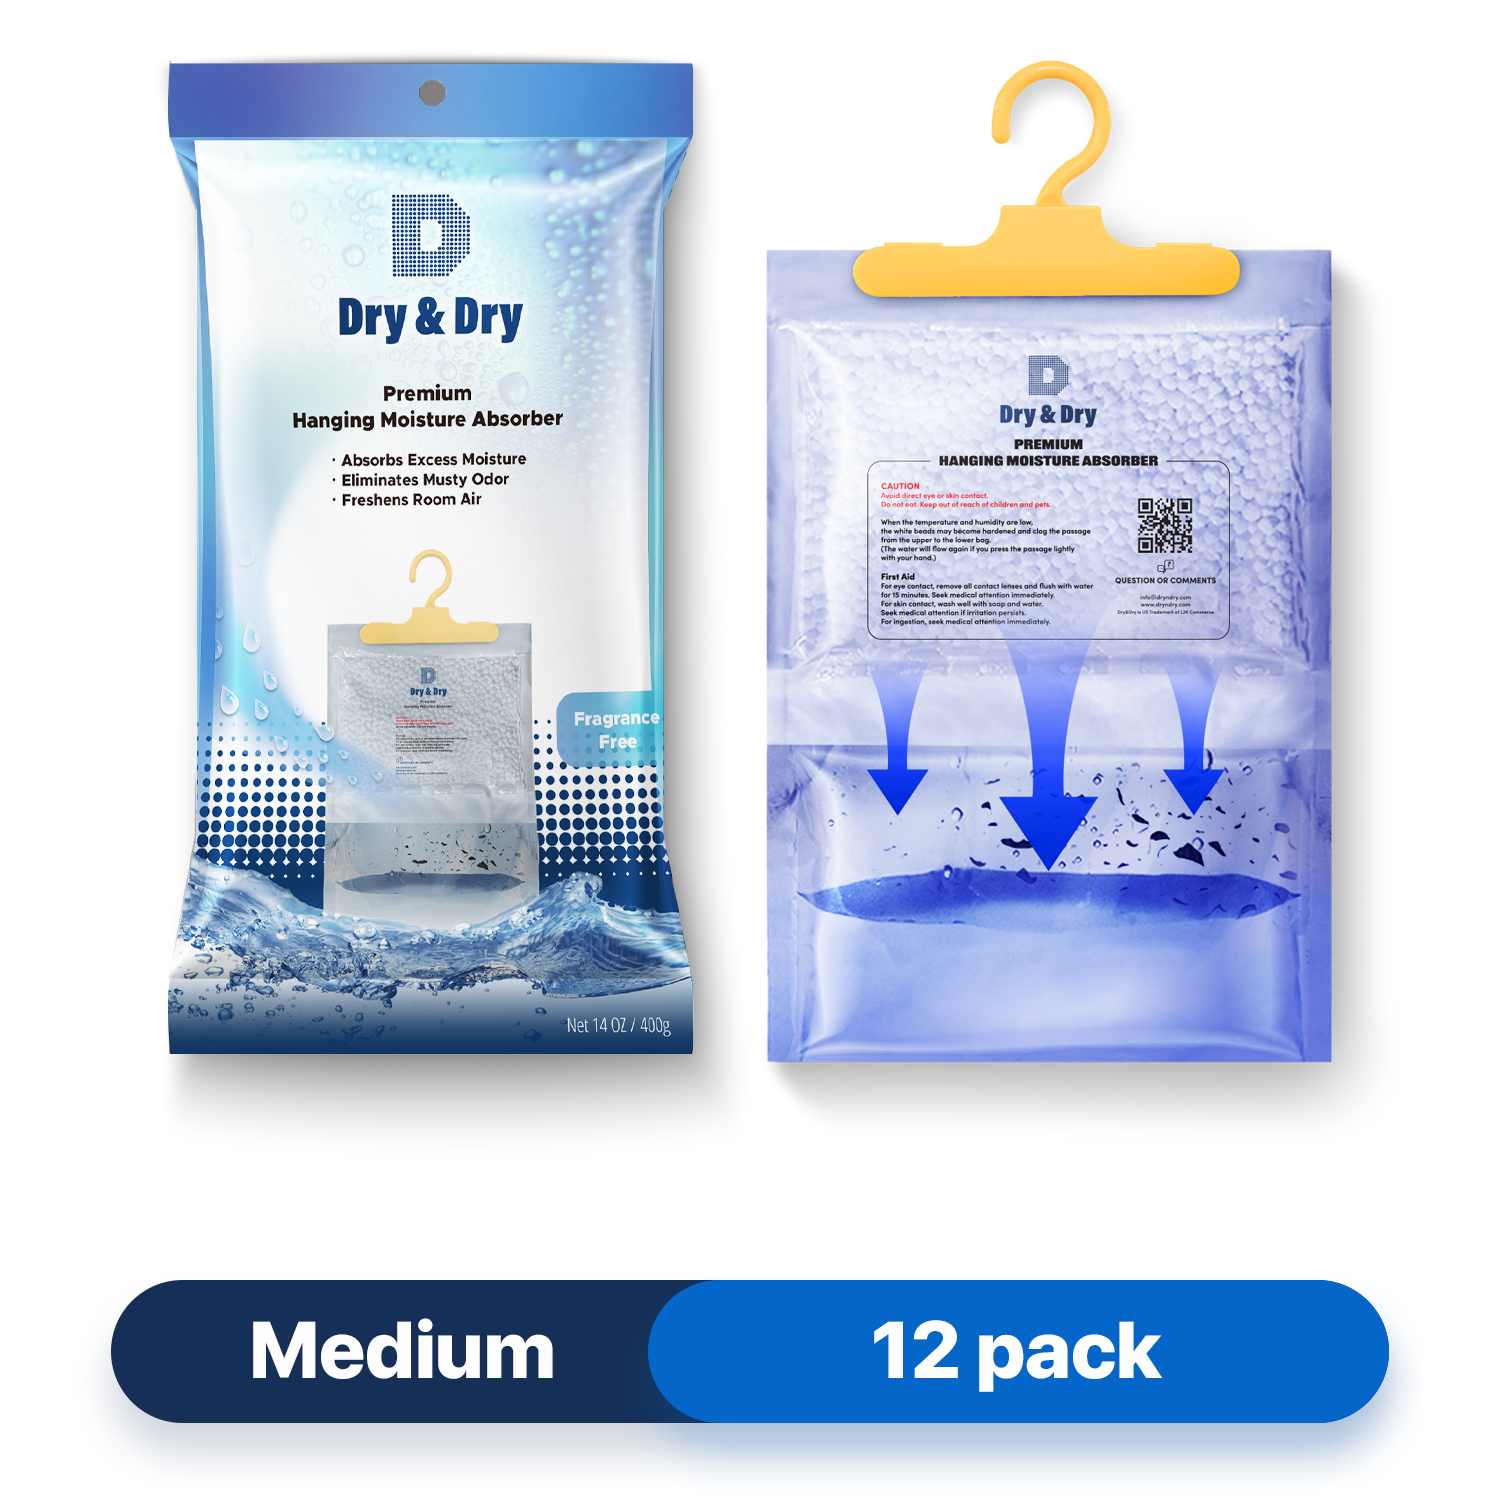 [12 pack] [Net 7 oz/Pack]  “Dry & Dry” Premium Hanging Moisture Absorber to Control Excess Moisture for Basements, Bathrooms, Laundry Rooms, and Enclosed Spaces